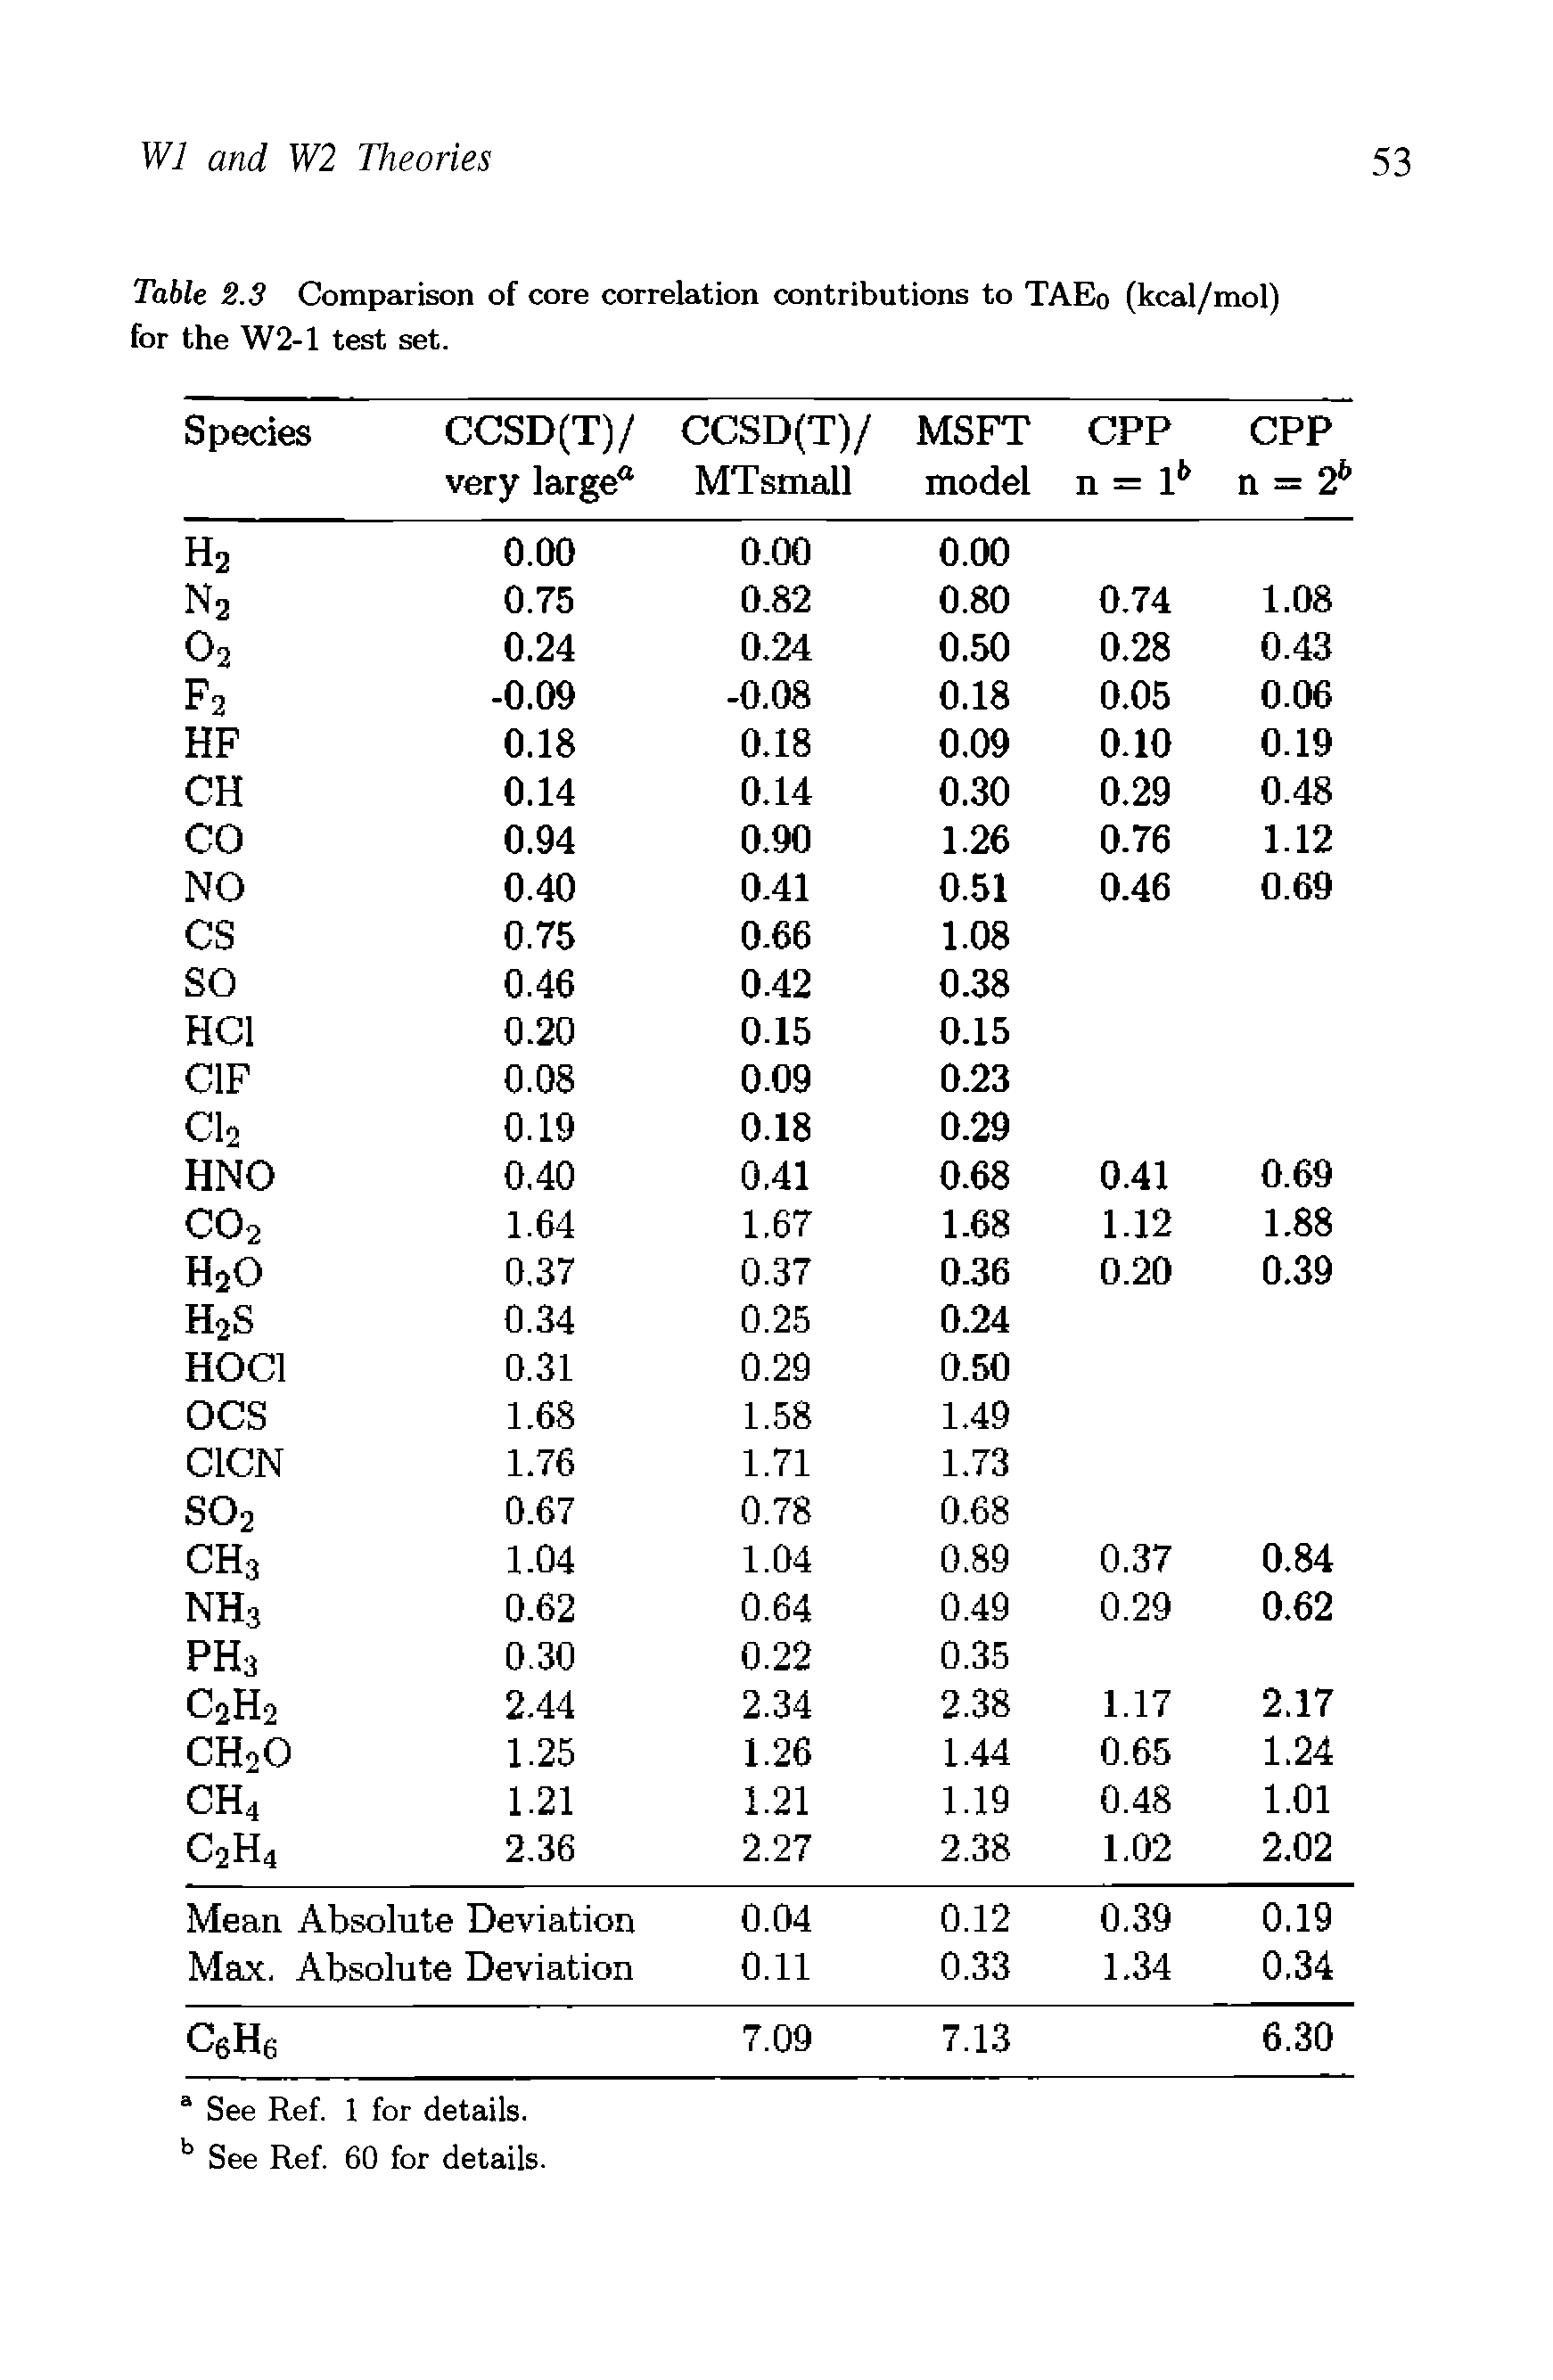 Table 2.3 Comparison of core correlation contributions to TAEo (kcal/mol) for the W2-1 test set.